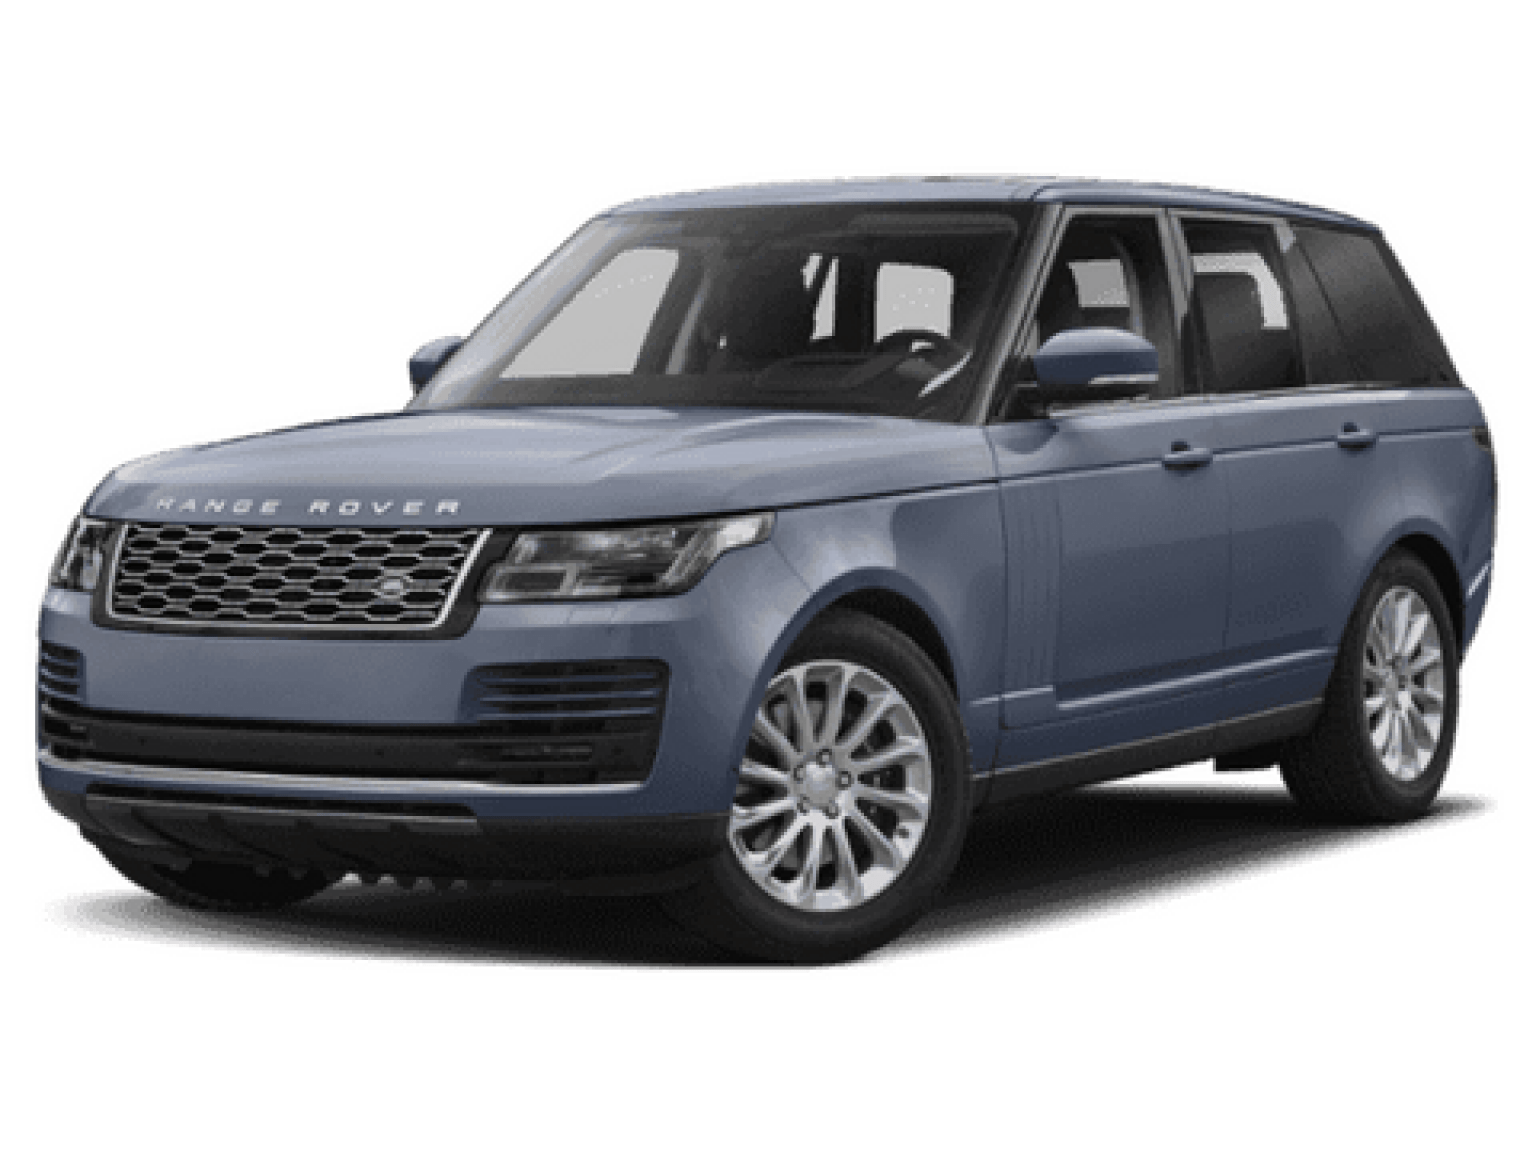 Land Rover Range Rover Westminster 2021 Price in South Africa